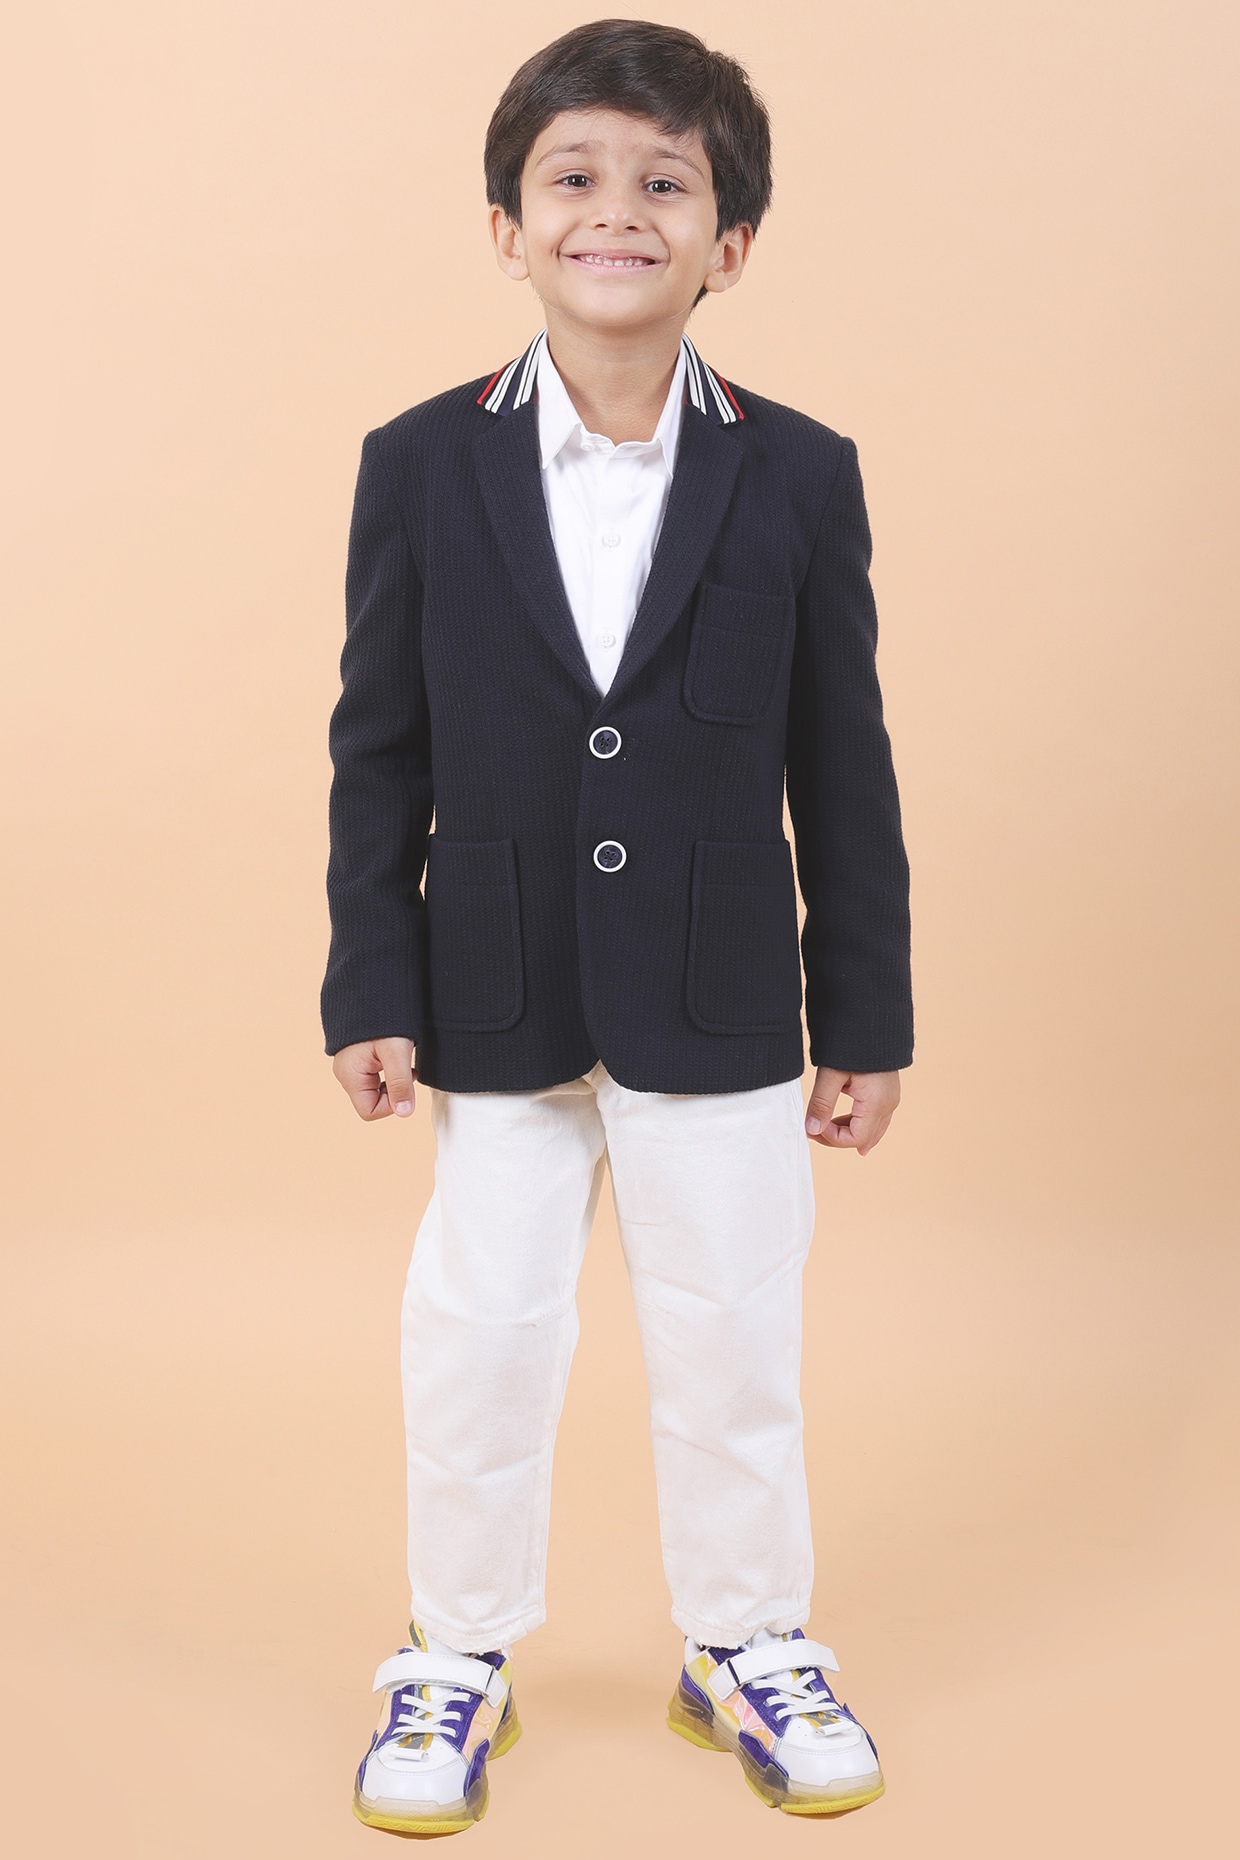 Viscose Blended Clean Blazer With Printed Mercerised Cotton T Shirt And  Jeans Combo Set For Boys at Rs 1400/piece | Little Boy Blazer in Kolkata |  ID: 25427319233